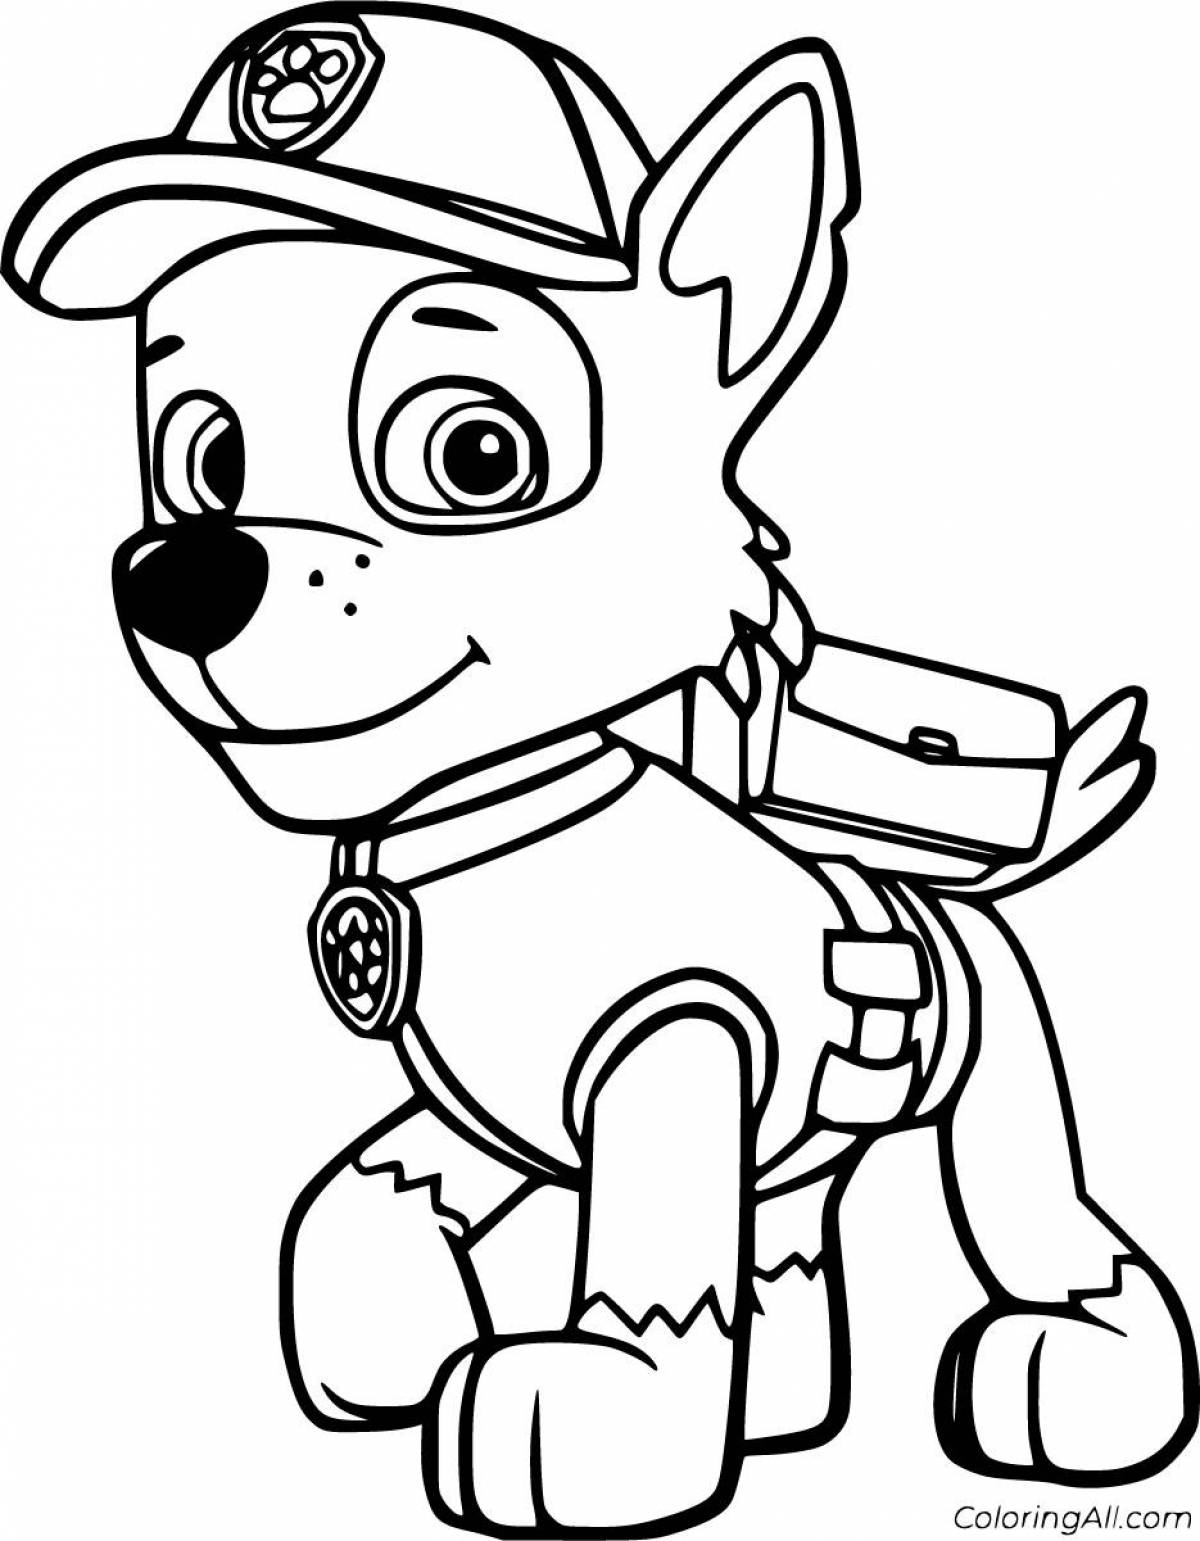 Rocky paw patrol coloring book